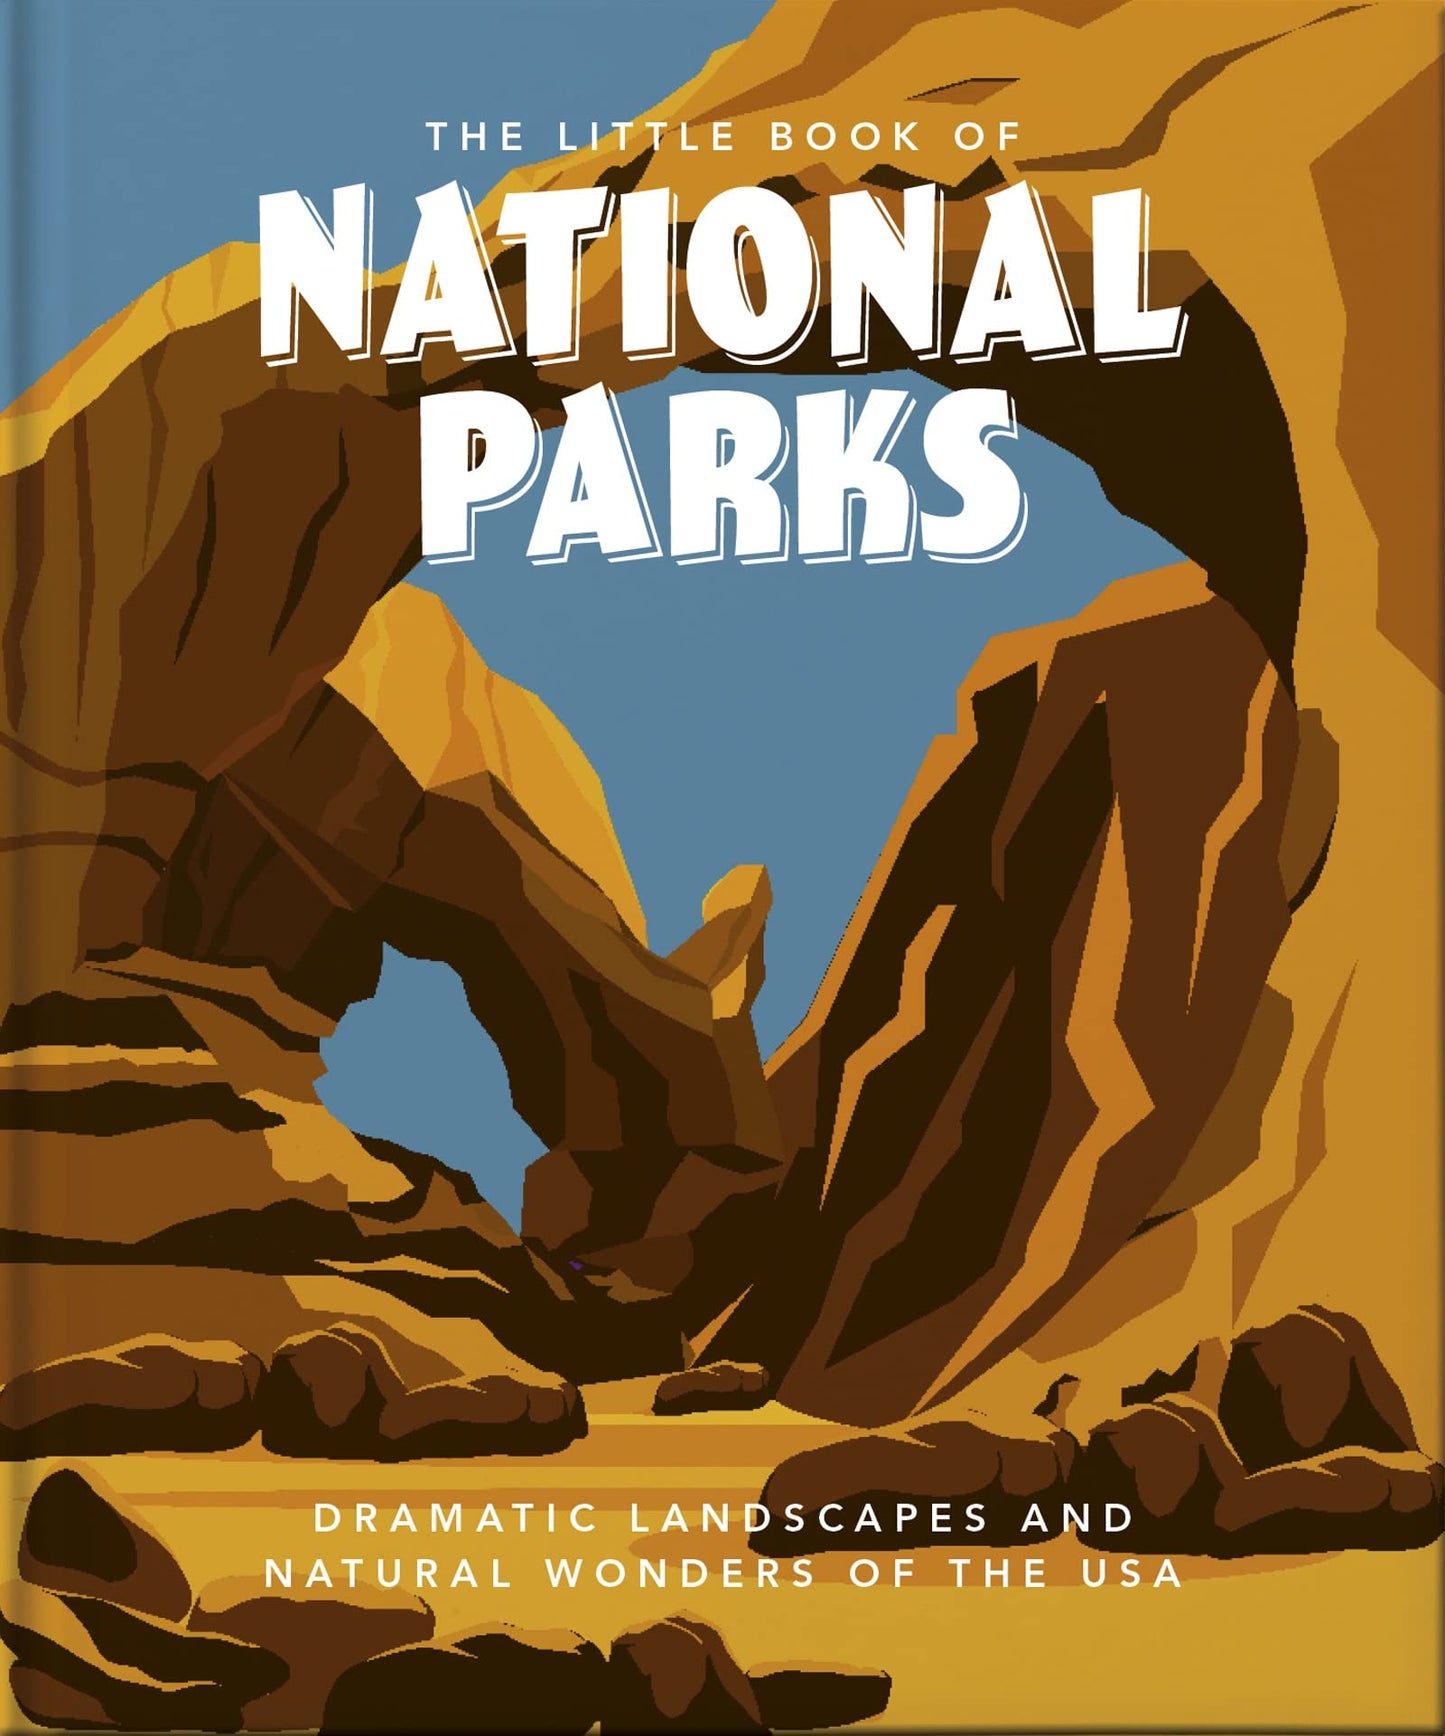 front cover of book has illustration of rock formations from a national park, and the title of book in white